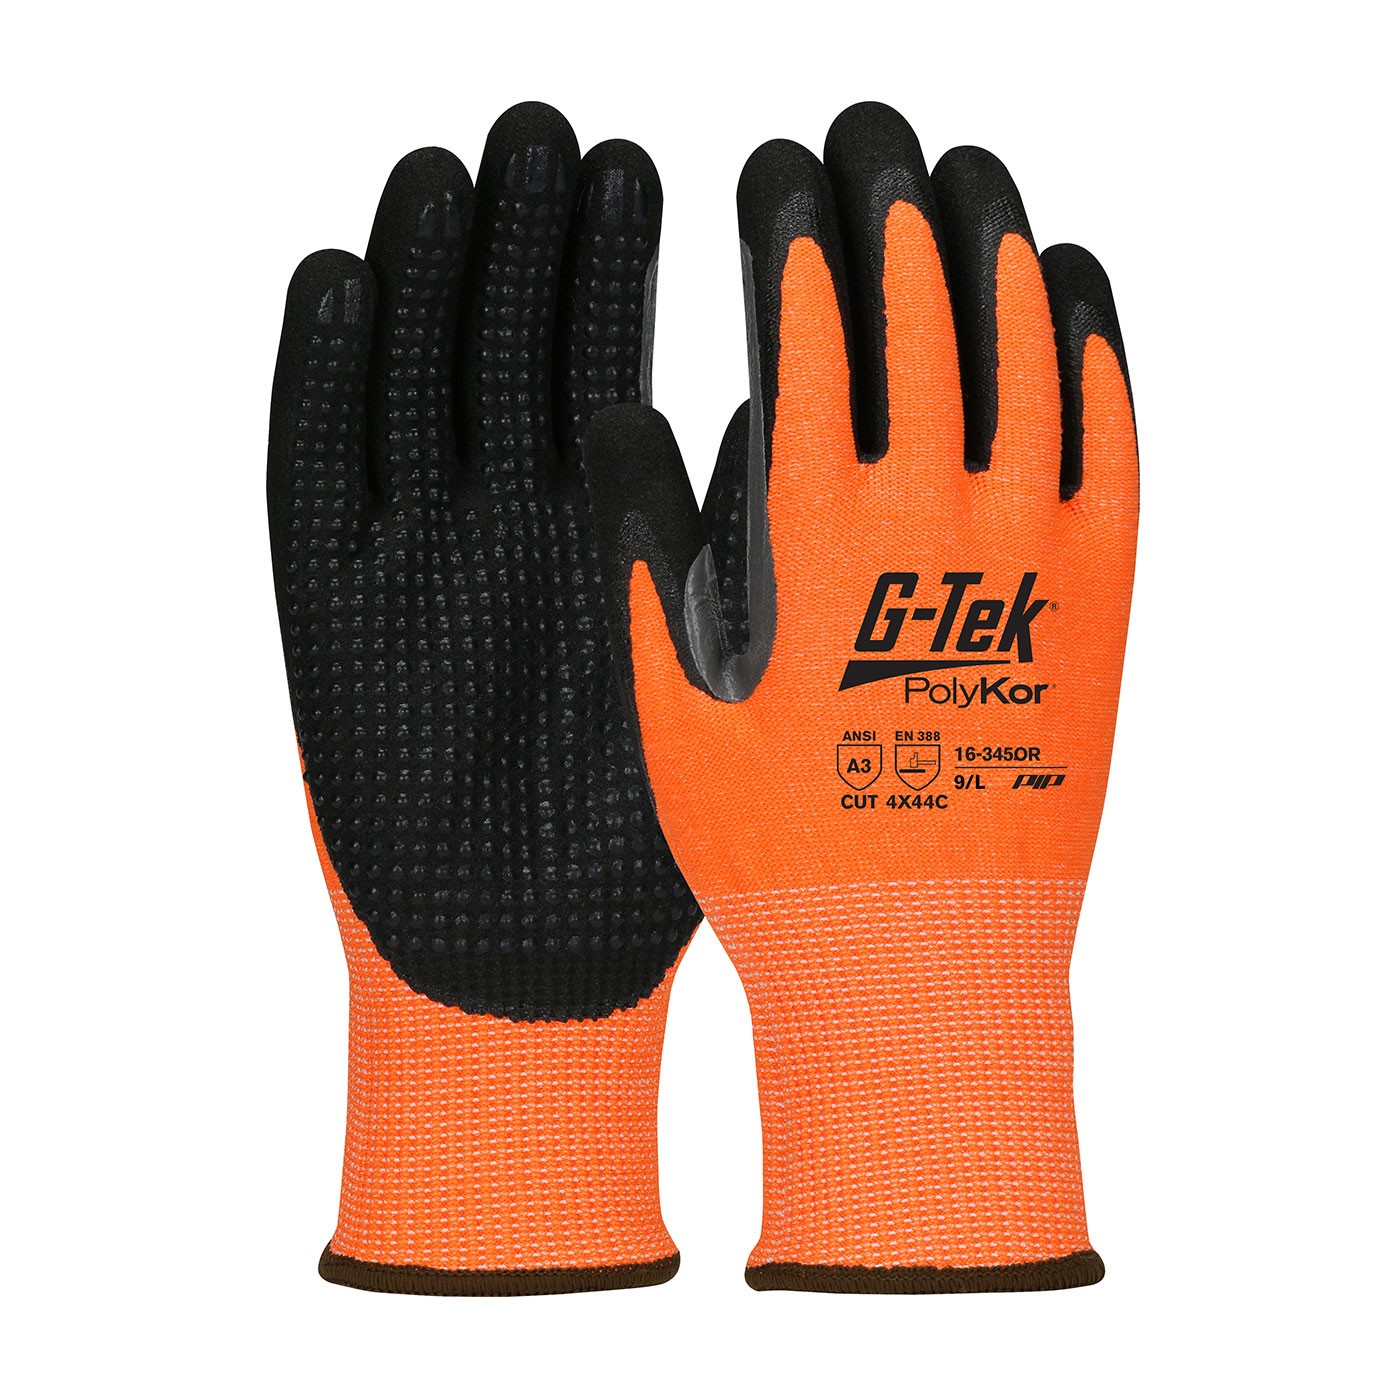 G-Tek® PolyKor® Hi-Vis Seamless Knit PolyKor® Blended Glove with Double-Dipped Nitrile Coated MicroSurface Grip on Palm & Fingers, Micro Dot Palm and Extended Thumb Crotch  (#16-345OR)